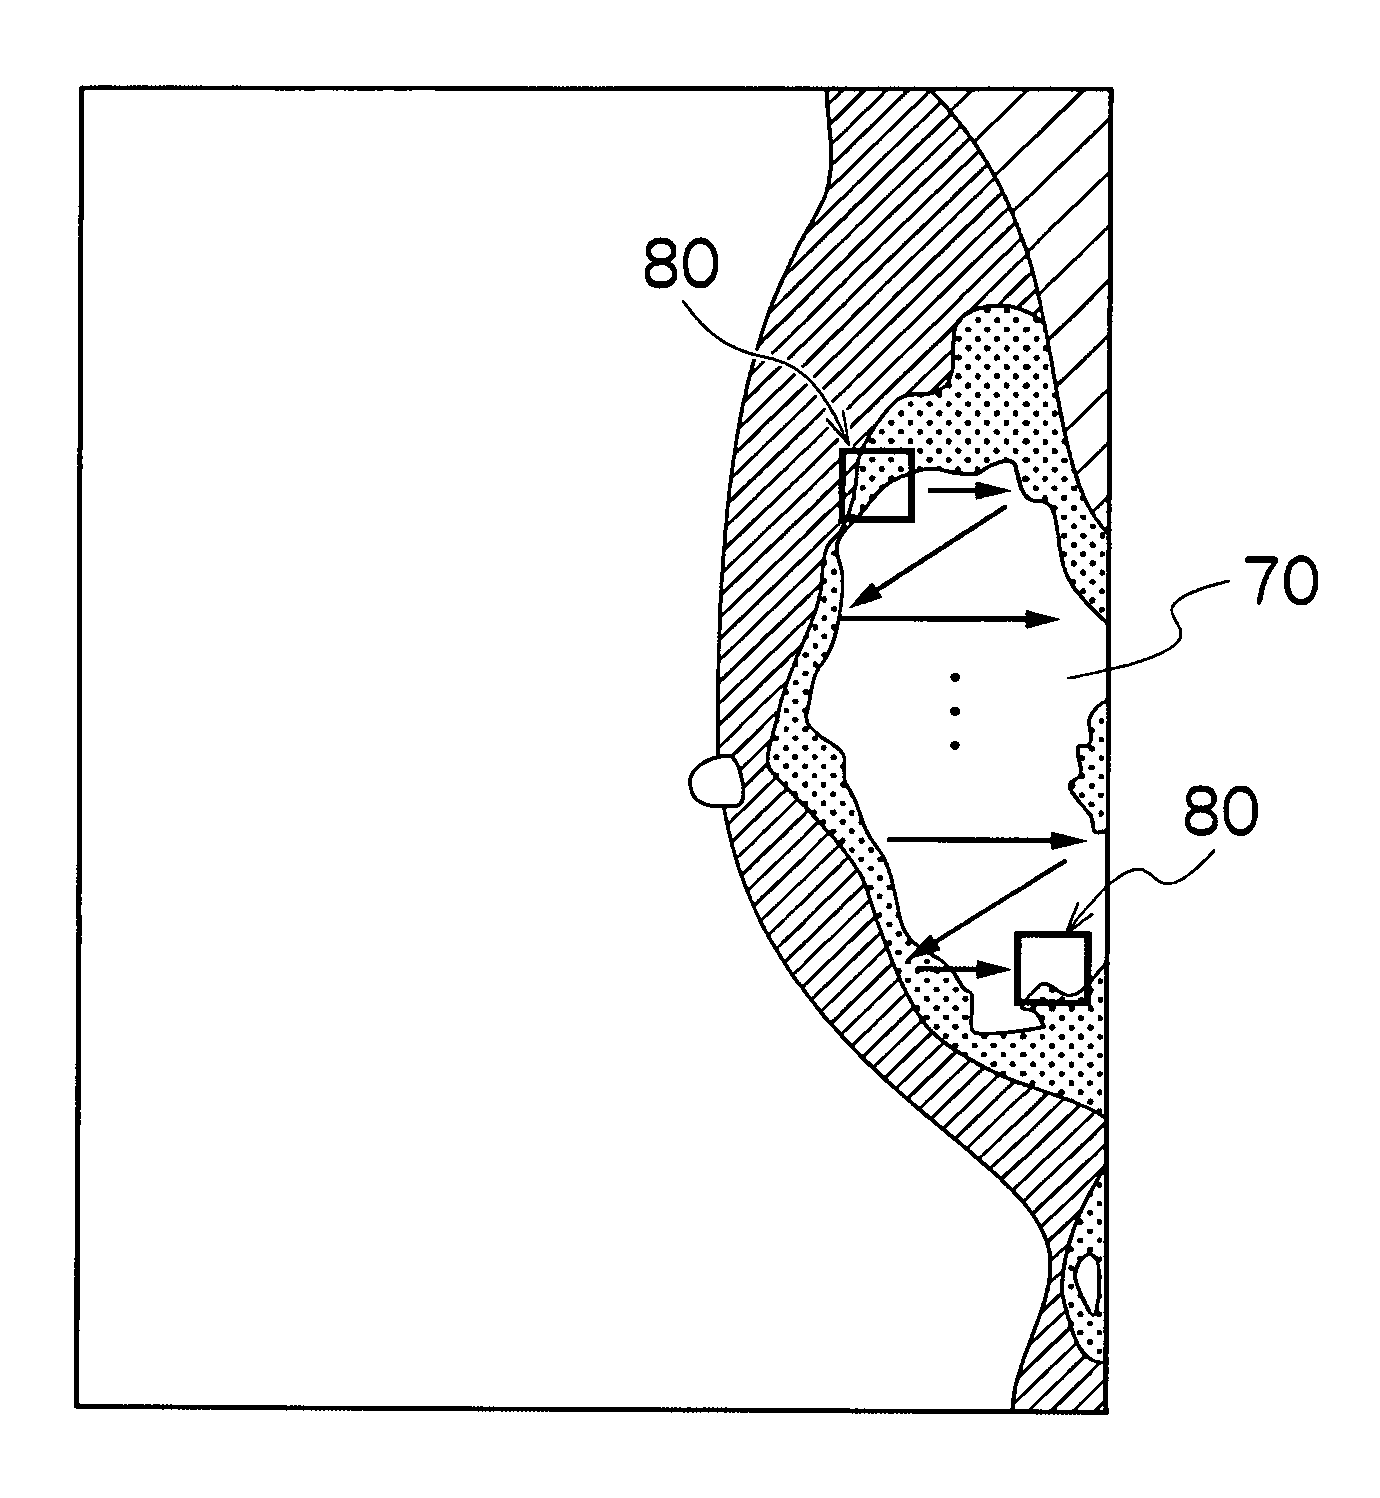 Image processing apparatus and image processing method, and recording medium for processing breast image based on local contrast values in a local region in a mammary gland region of breast image